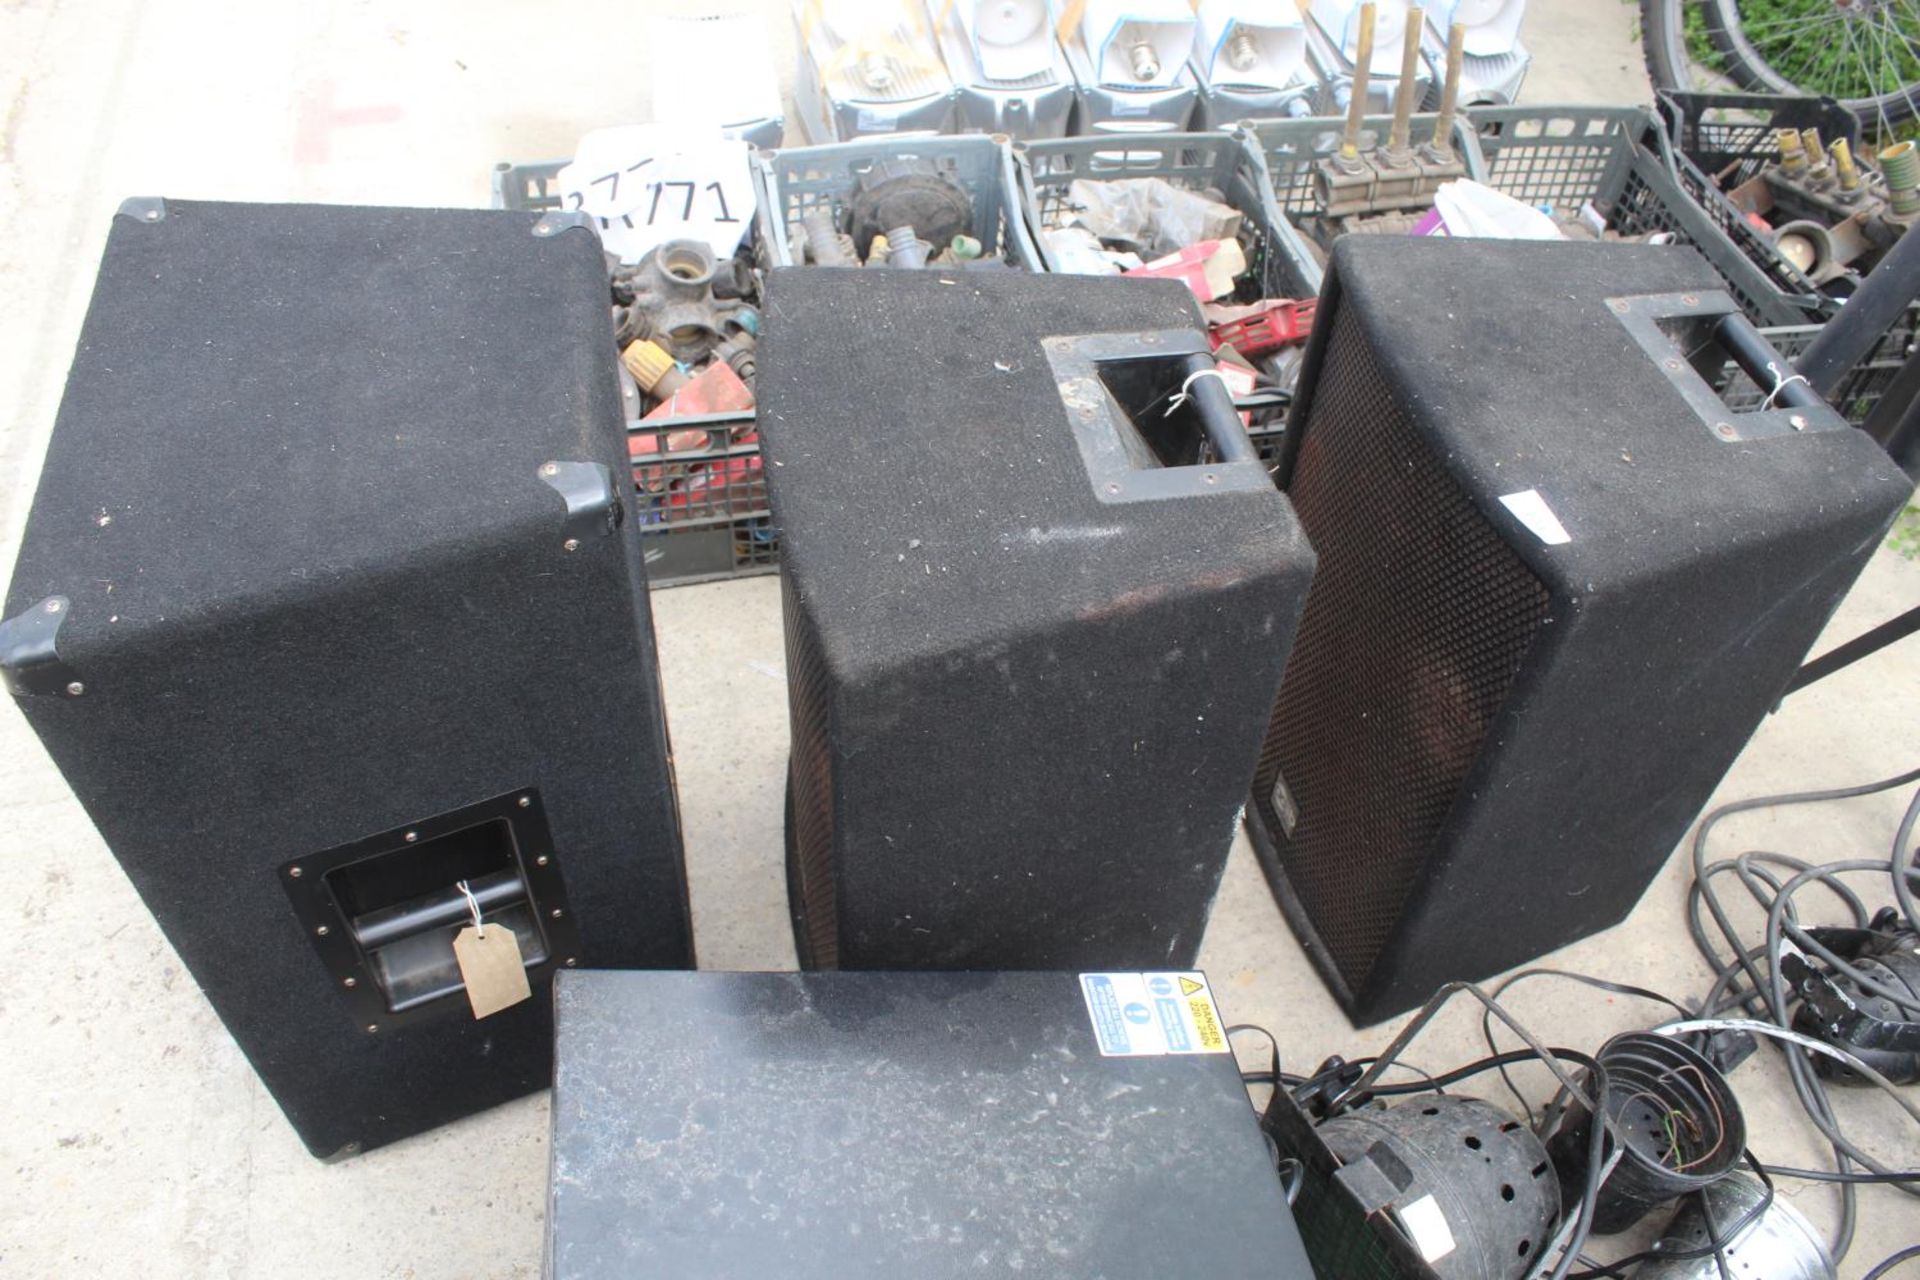 3 SPEAKERS AND TRIPODS , DISCO LIGHTS, MIXING EQUIPMENT, SMOKE MACHINE AND LASER NO VAT - Image 3 of 6